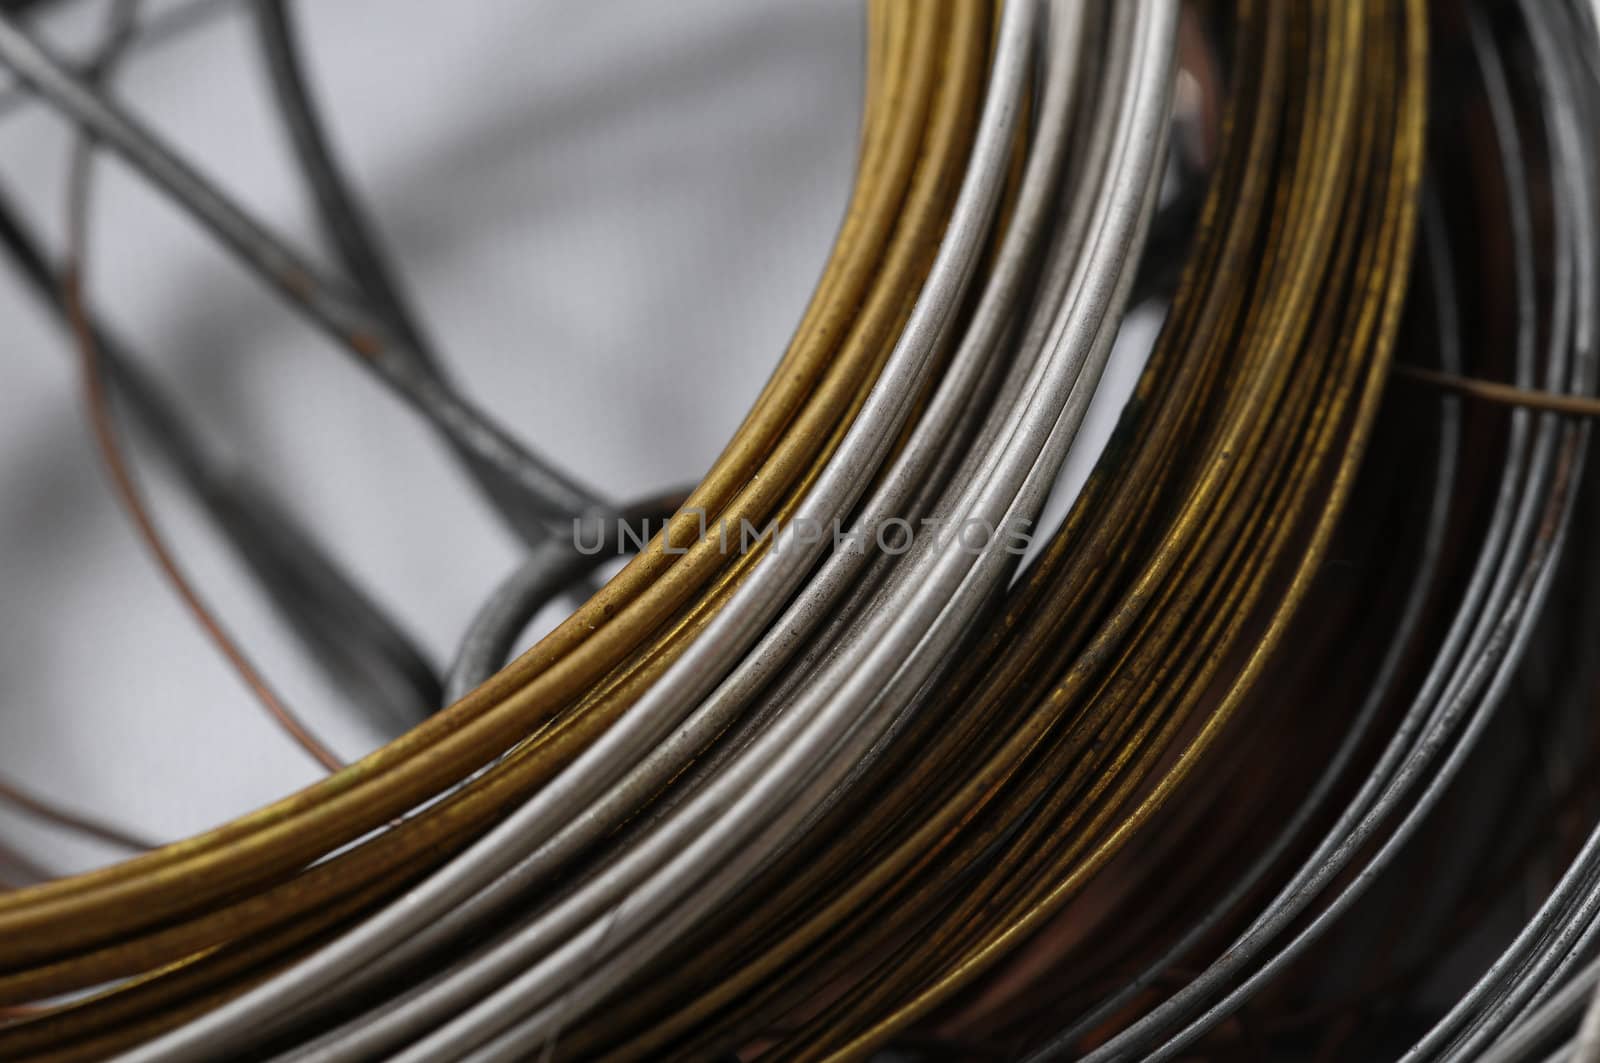 Lot of Different Metal Wire Isolated on a White Background